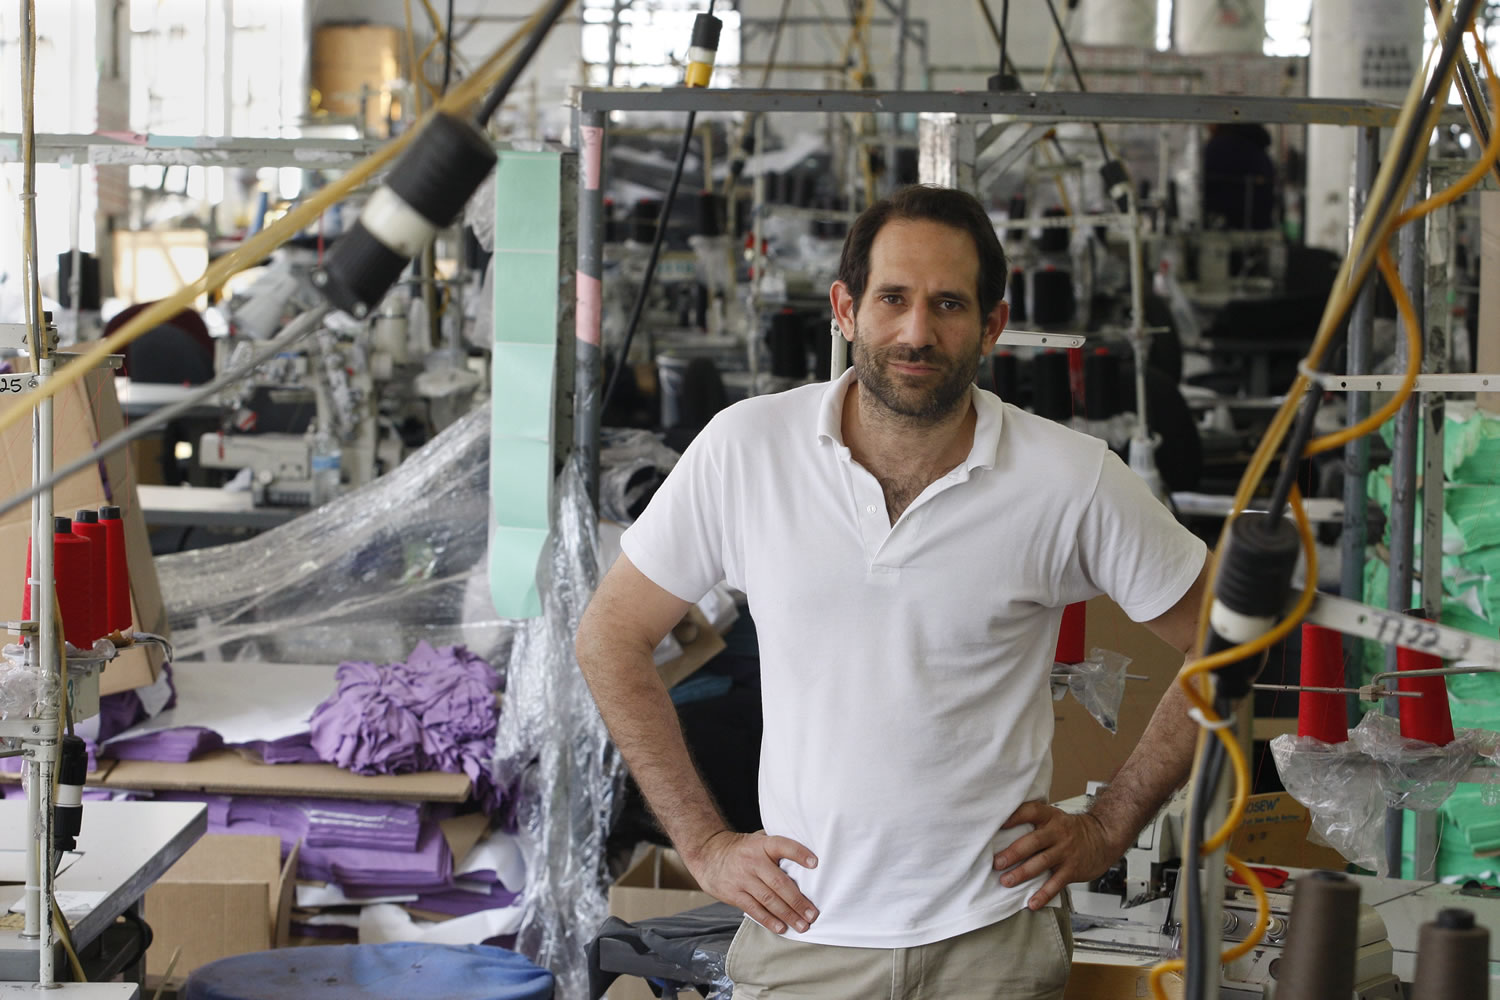 The board of American Apparel voted to oust Dov Charney as chairman and notified him of its intent to remove him as president and chief executive, the clothing chain said in a statement Wednesday night.